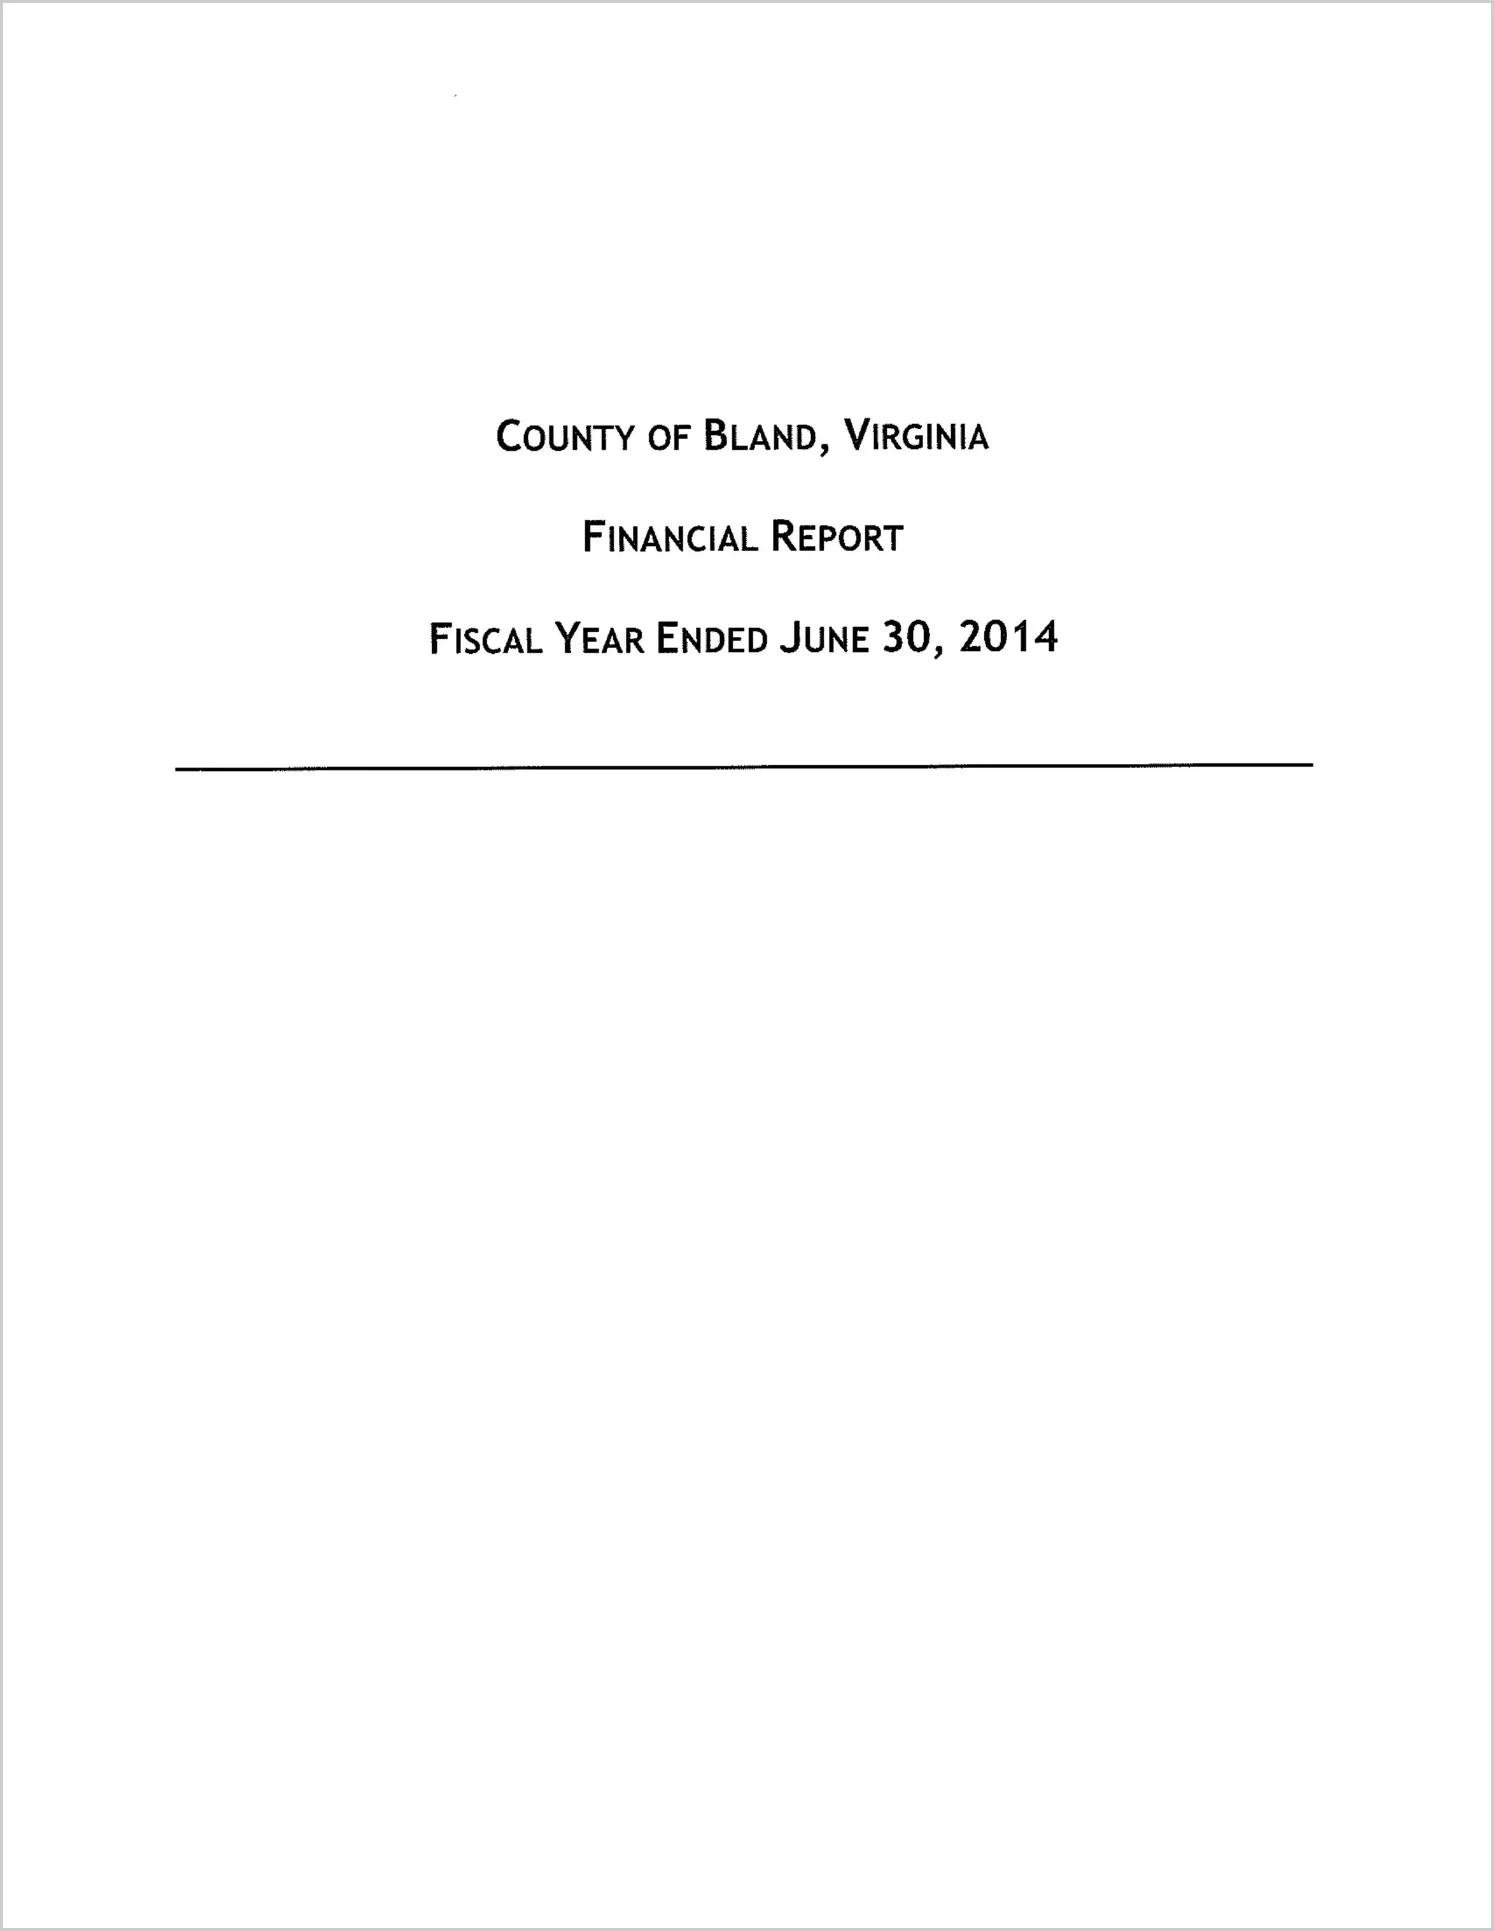 2014 Annual Financial Report for County of Bland